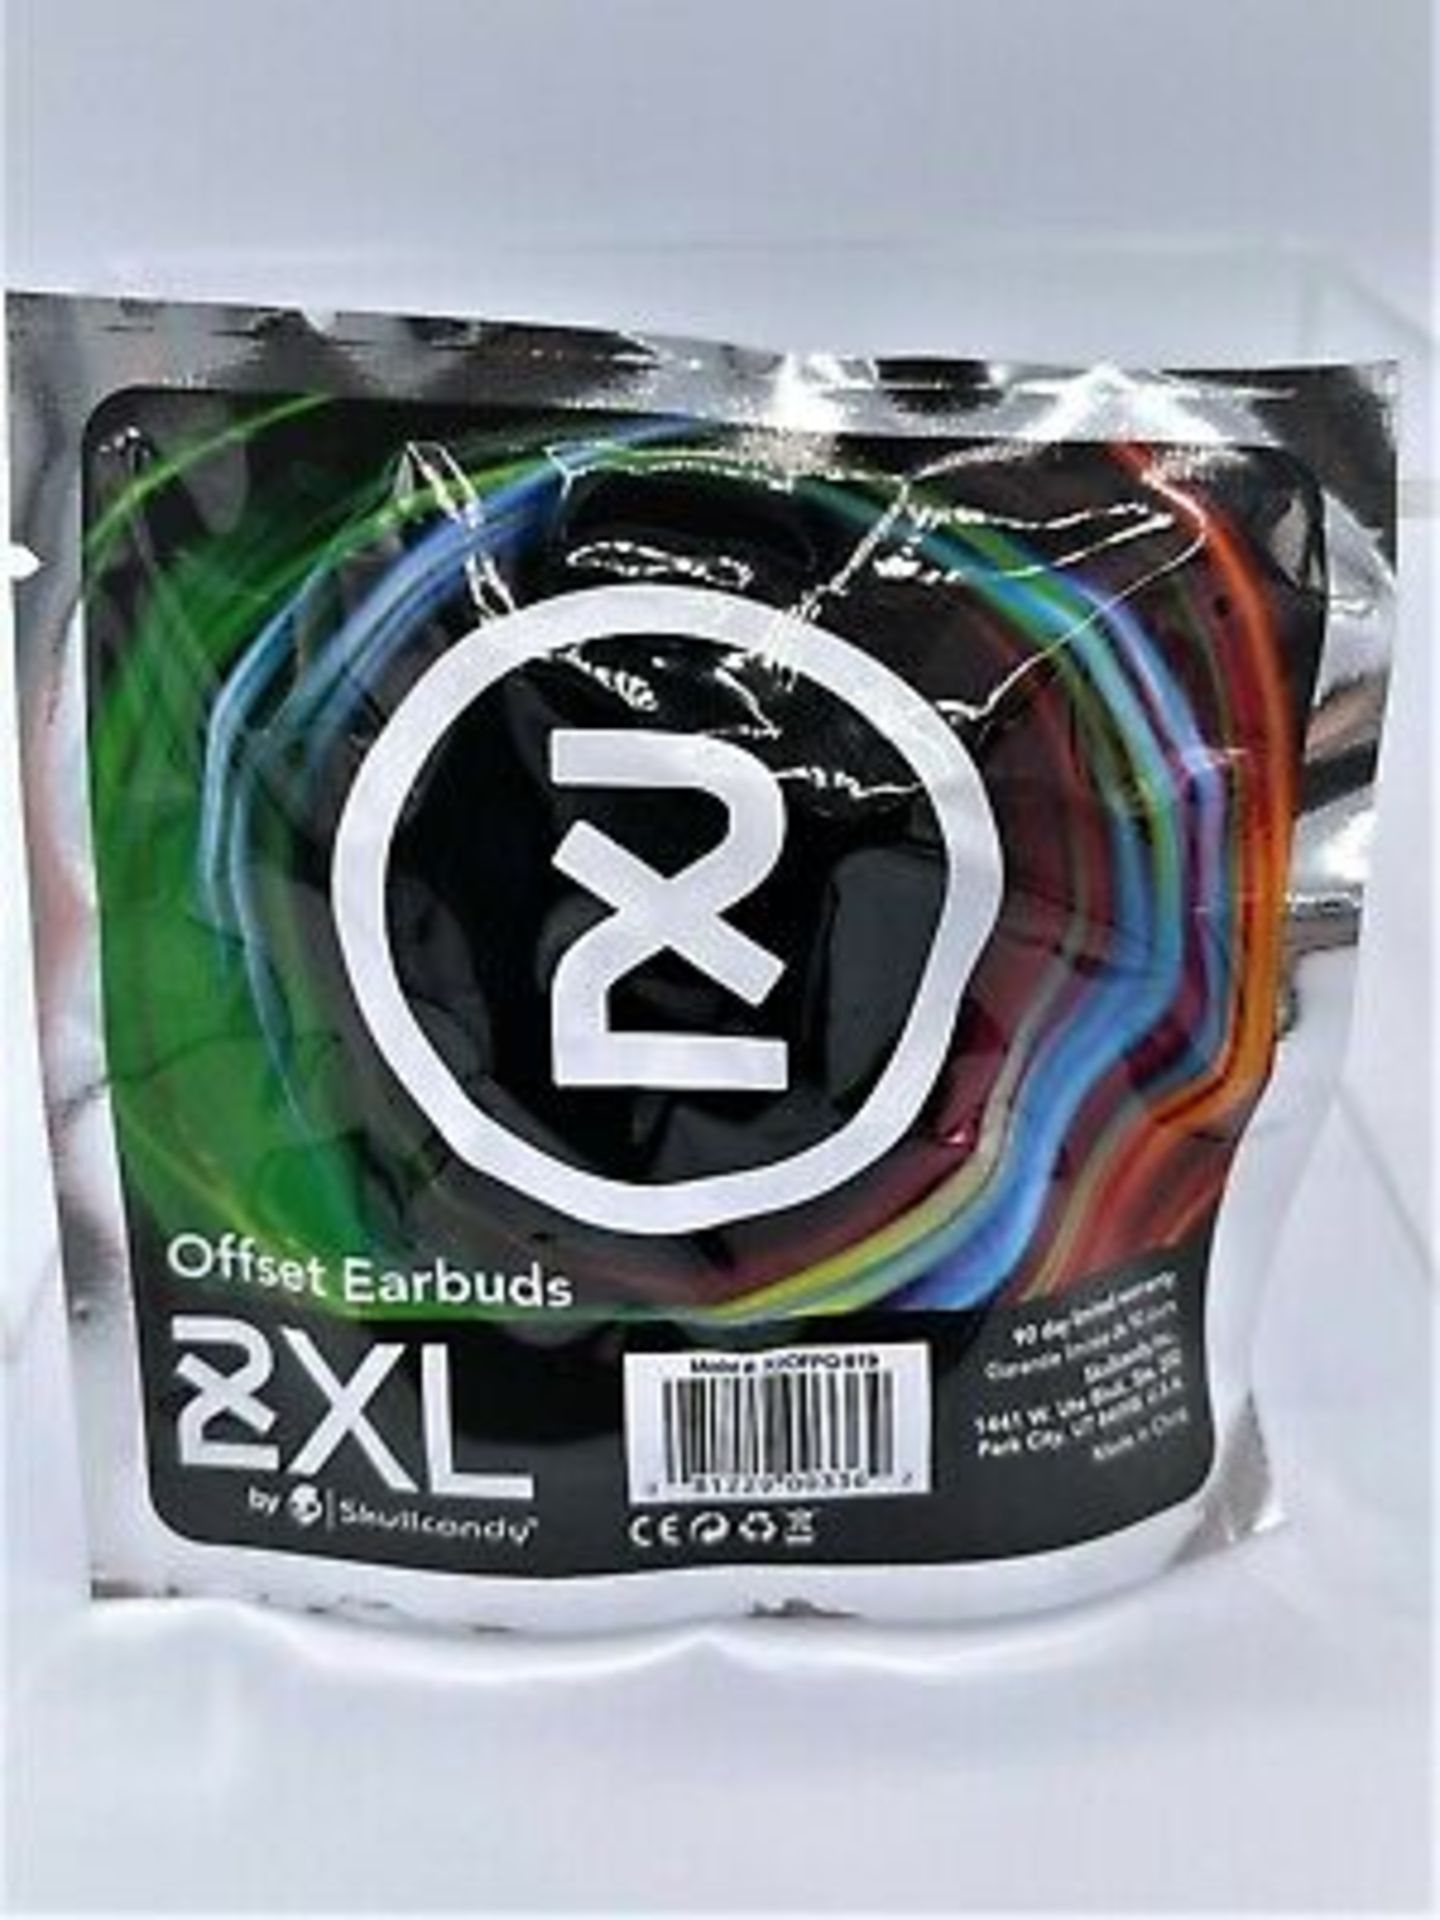 RRP £9.99 each - 50 x 2XL Offset earbuds/headphones by Skullcandy - Image 2 of 2